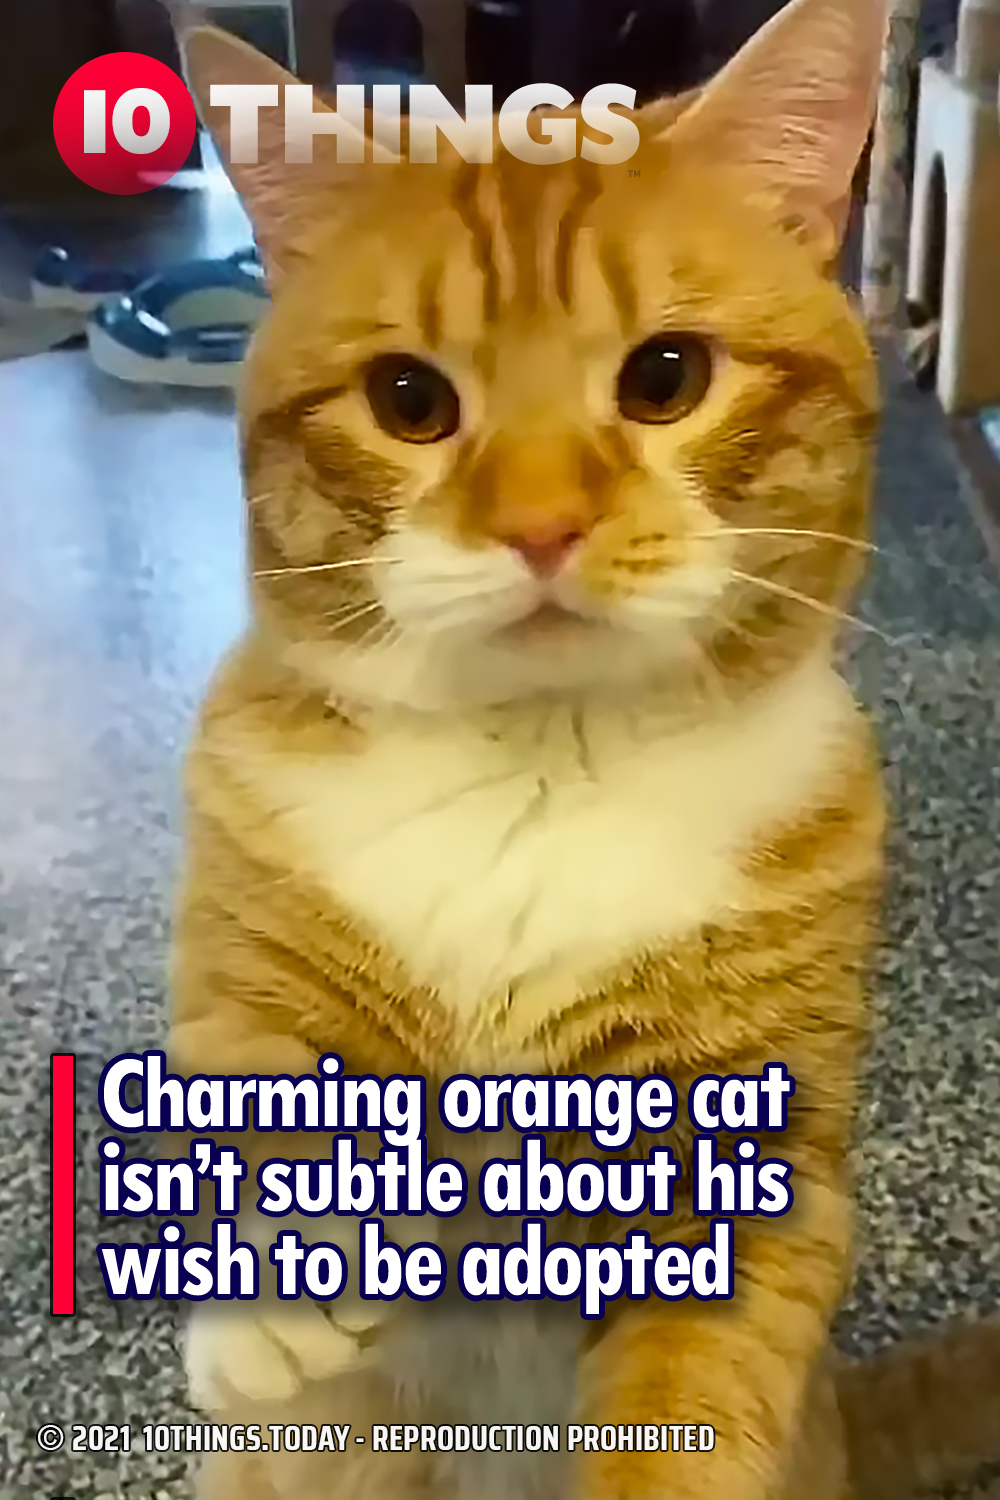 Charming orange cat isn’t subtle about his wish to be adopted